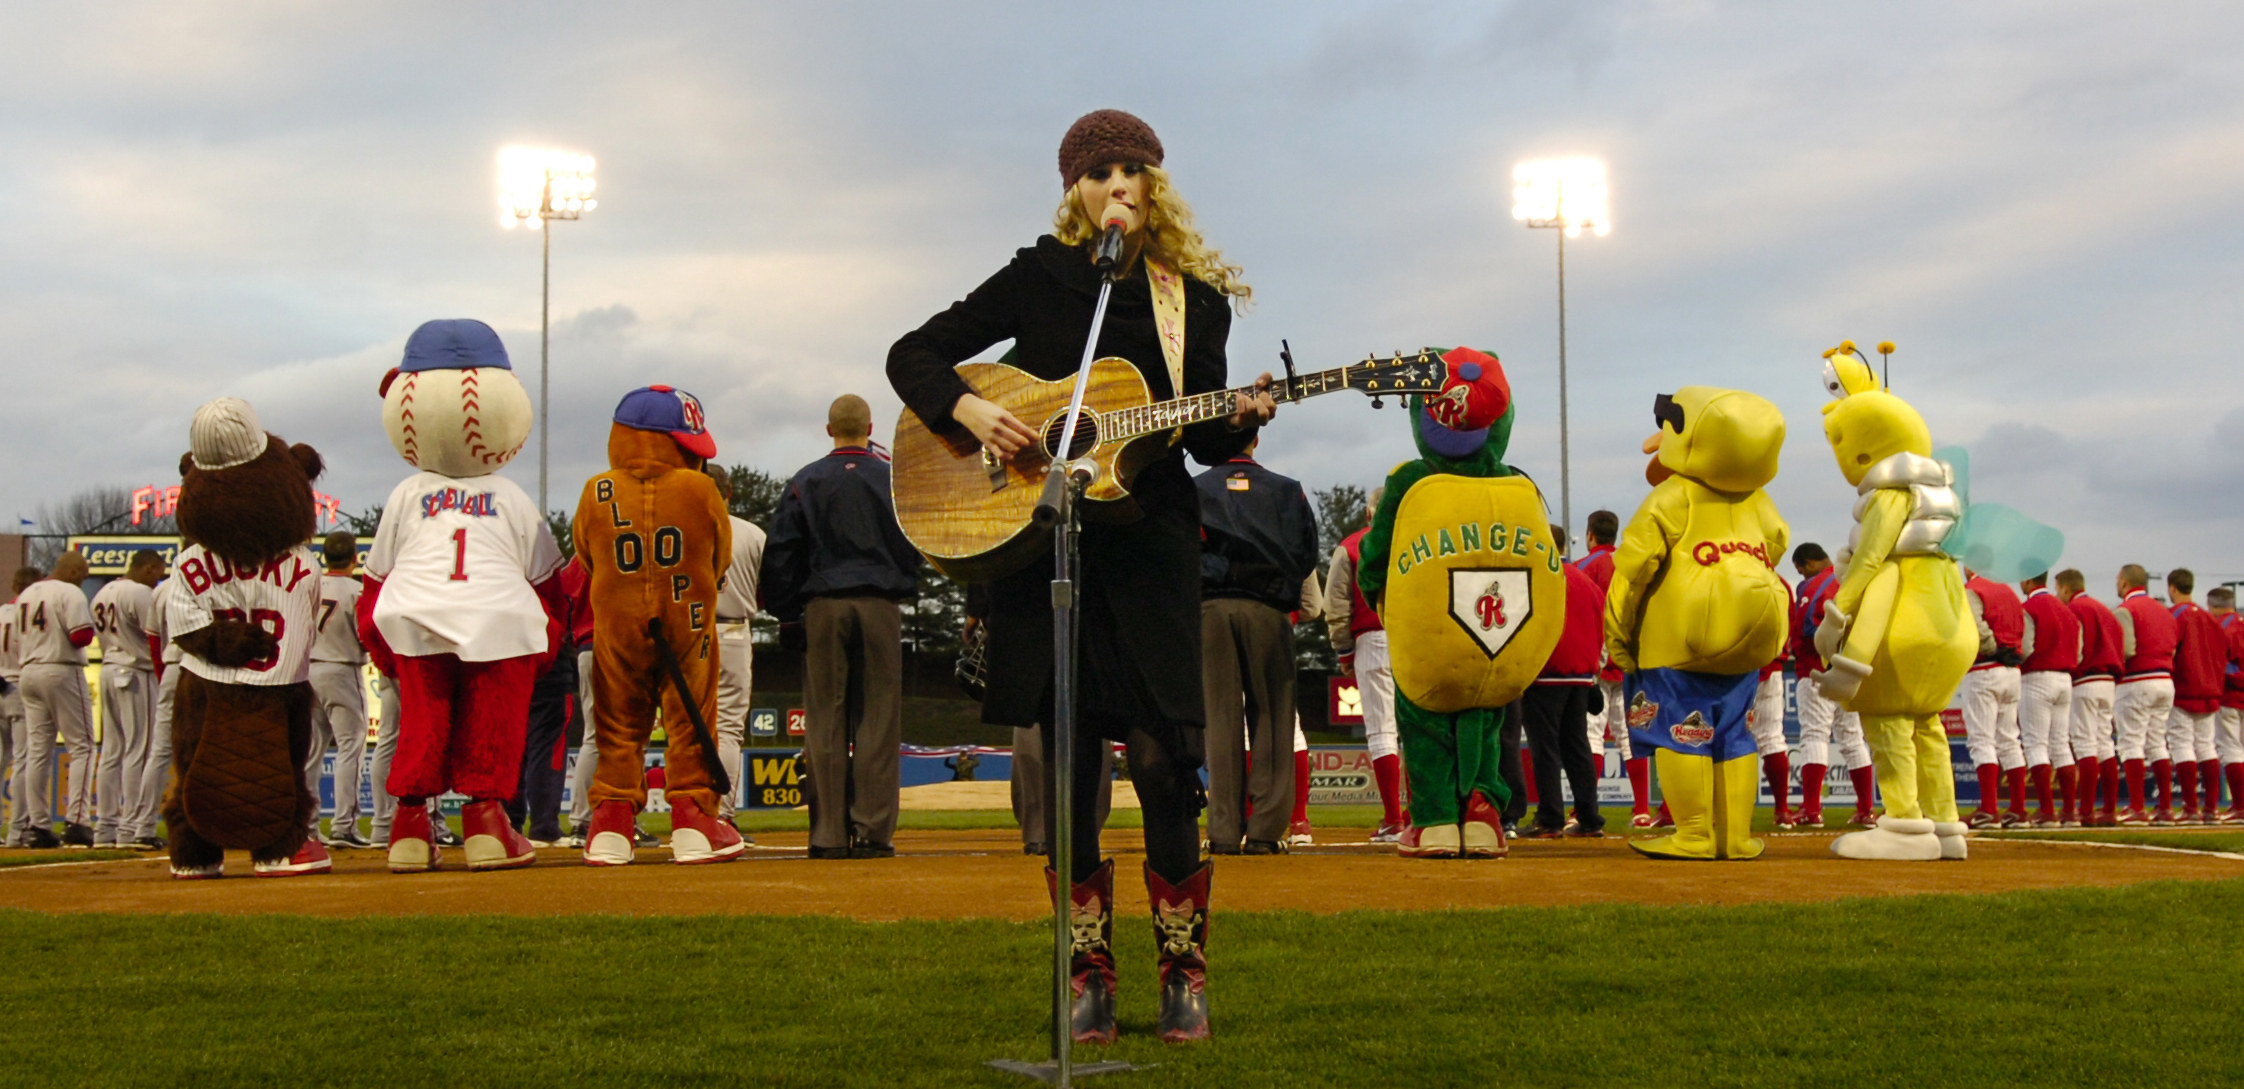 Taylor standing in front of a podium and playing guitar on a grassy field with mascots and team members behind her